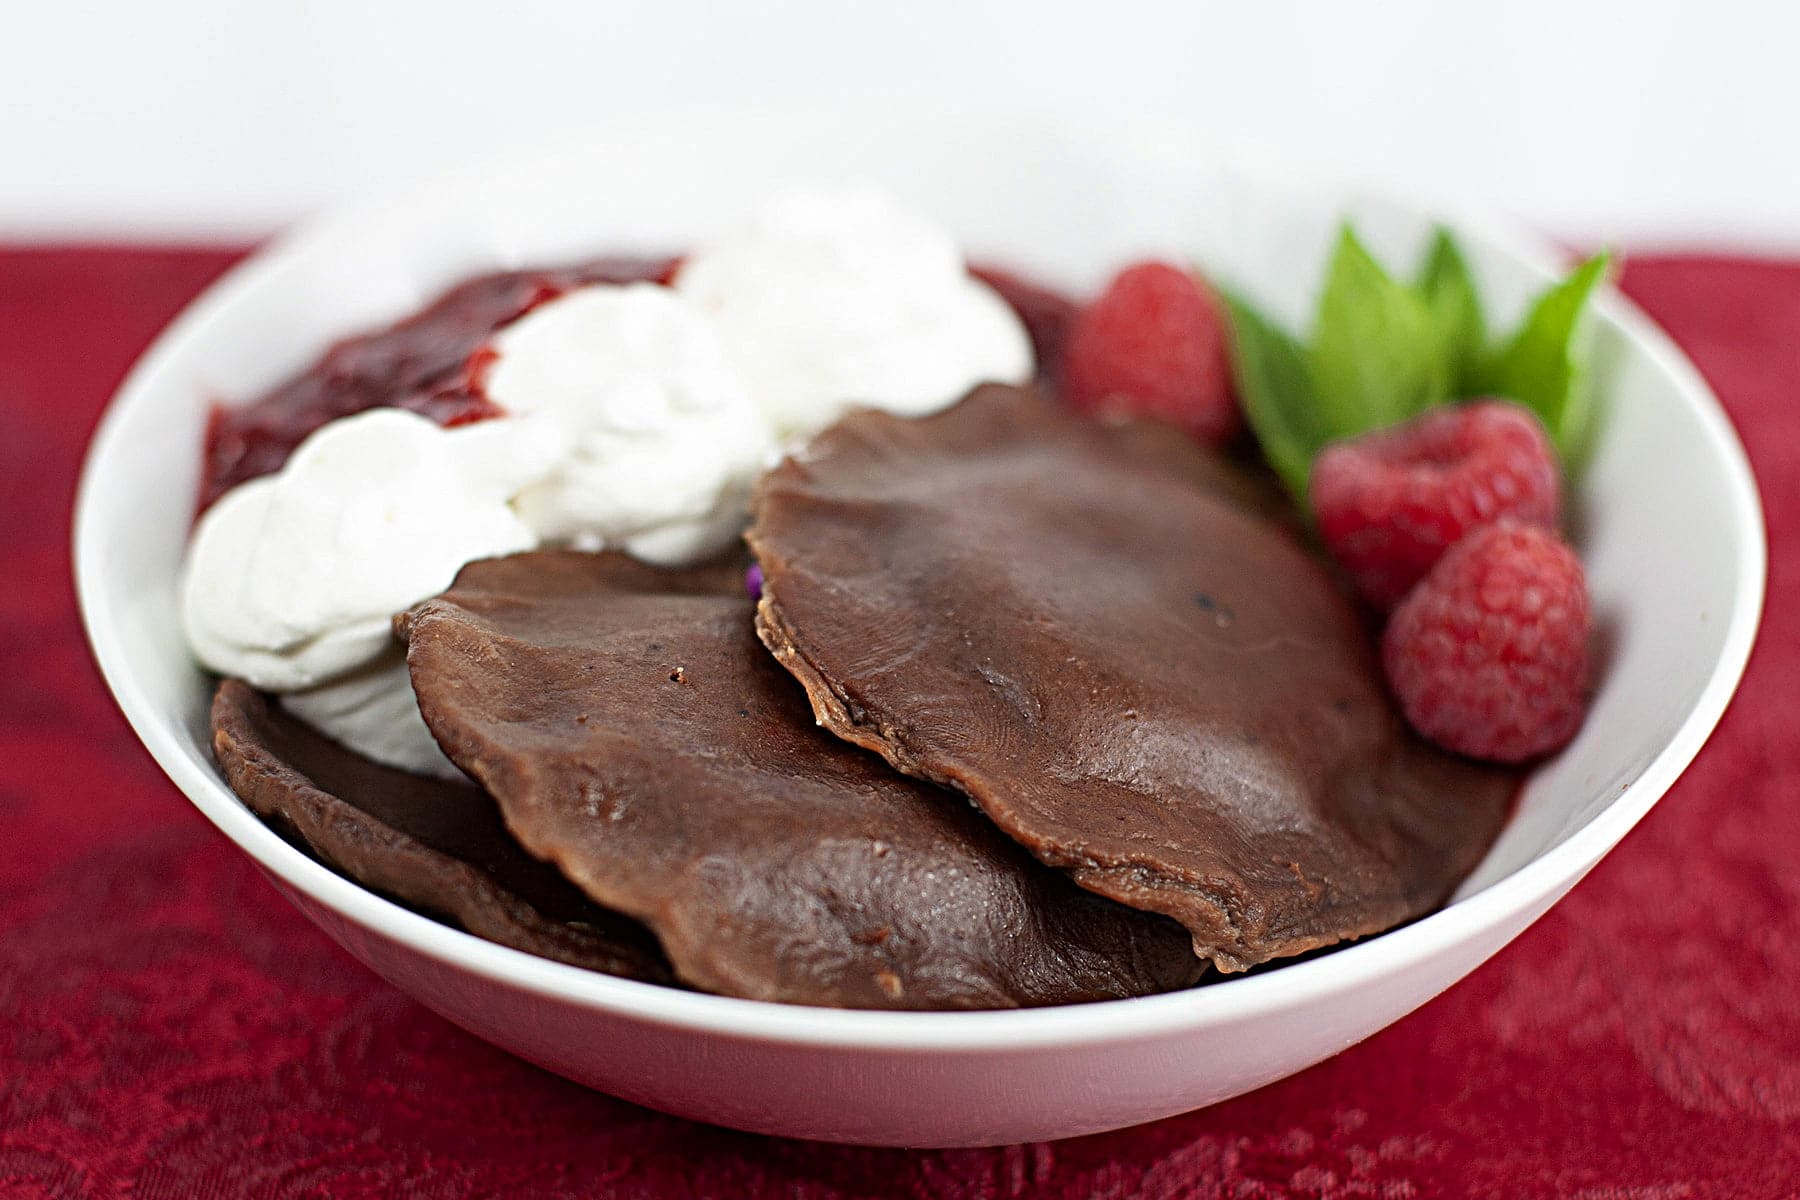 A white bowl holds 2 large chocolate ravioli. There is whipped cream and raspberry sauce on the side, and it is garnished with raspberries and mint.